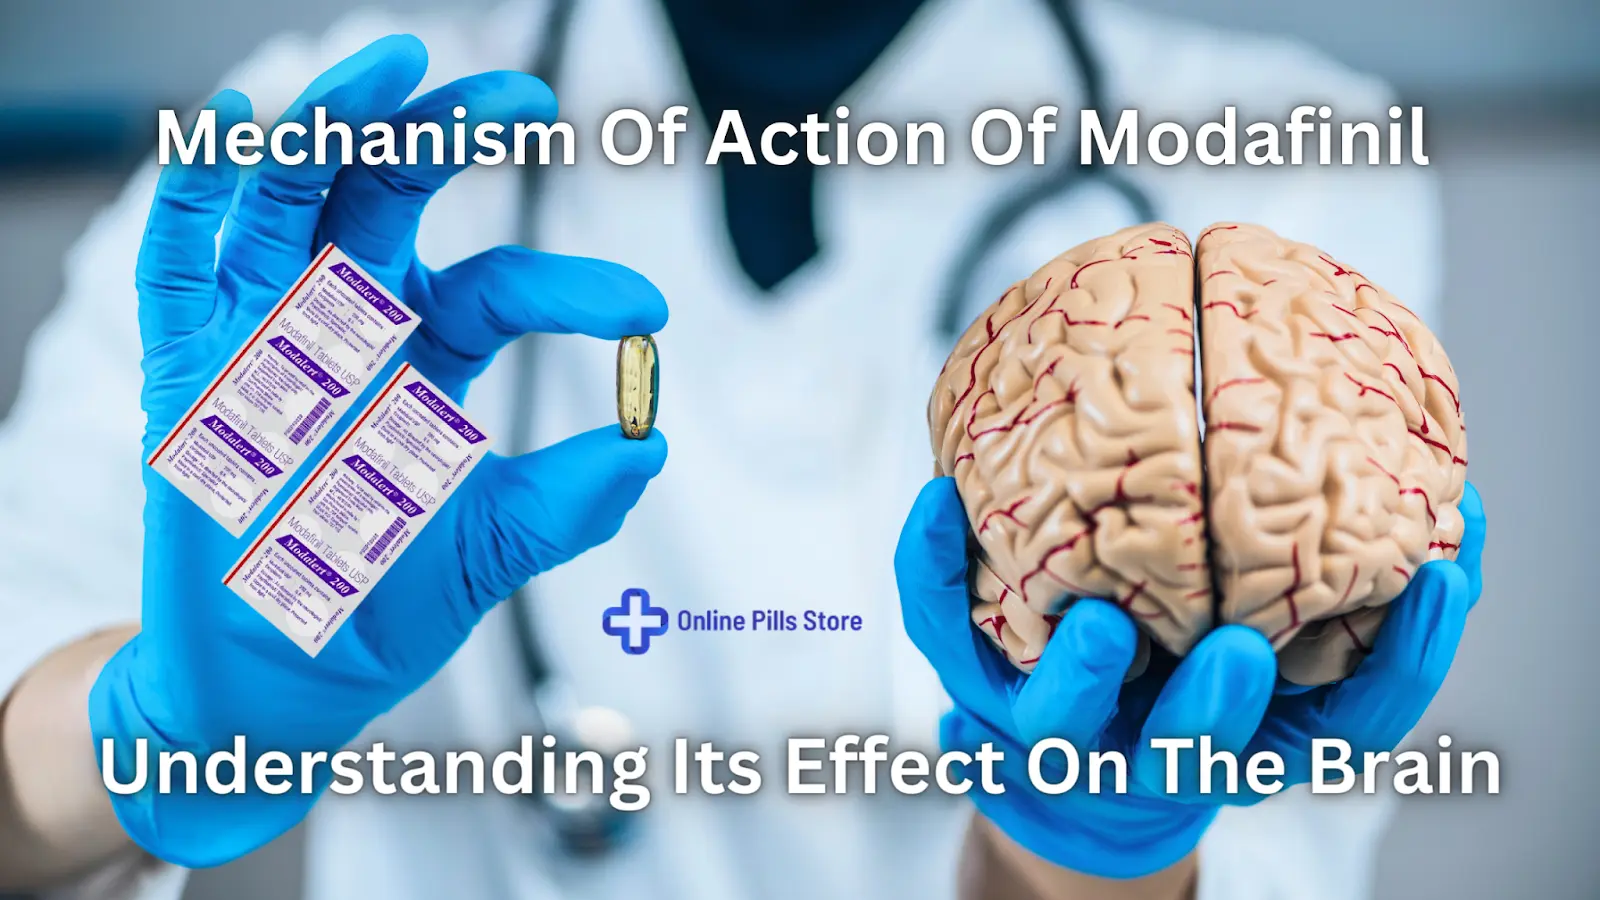 Mechanism Of Action Of Modafinil- Understanding Its Effect On The Brain